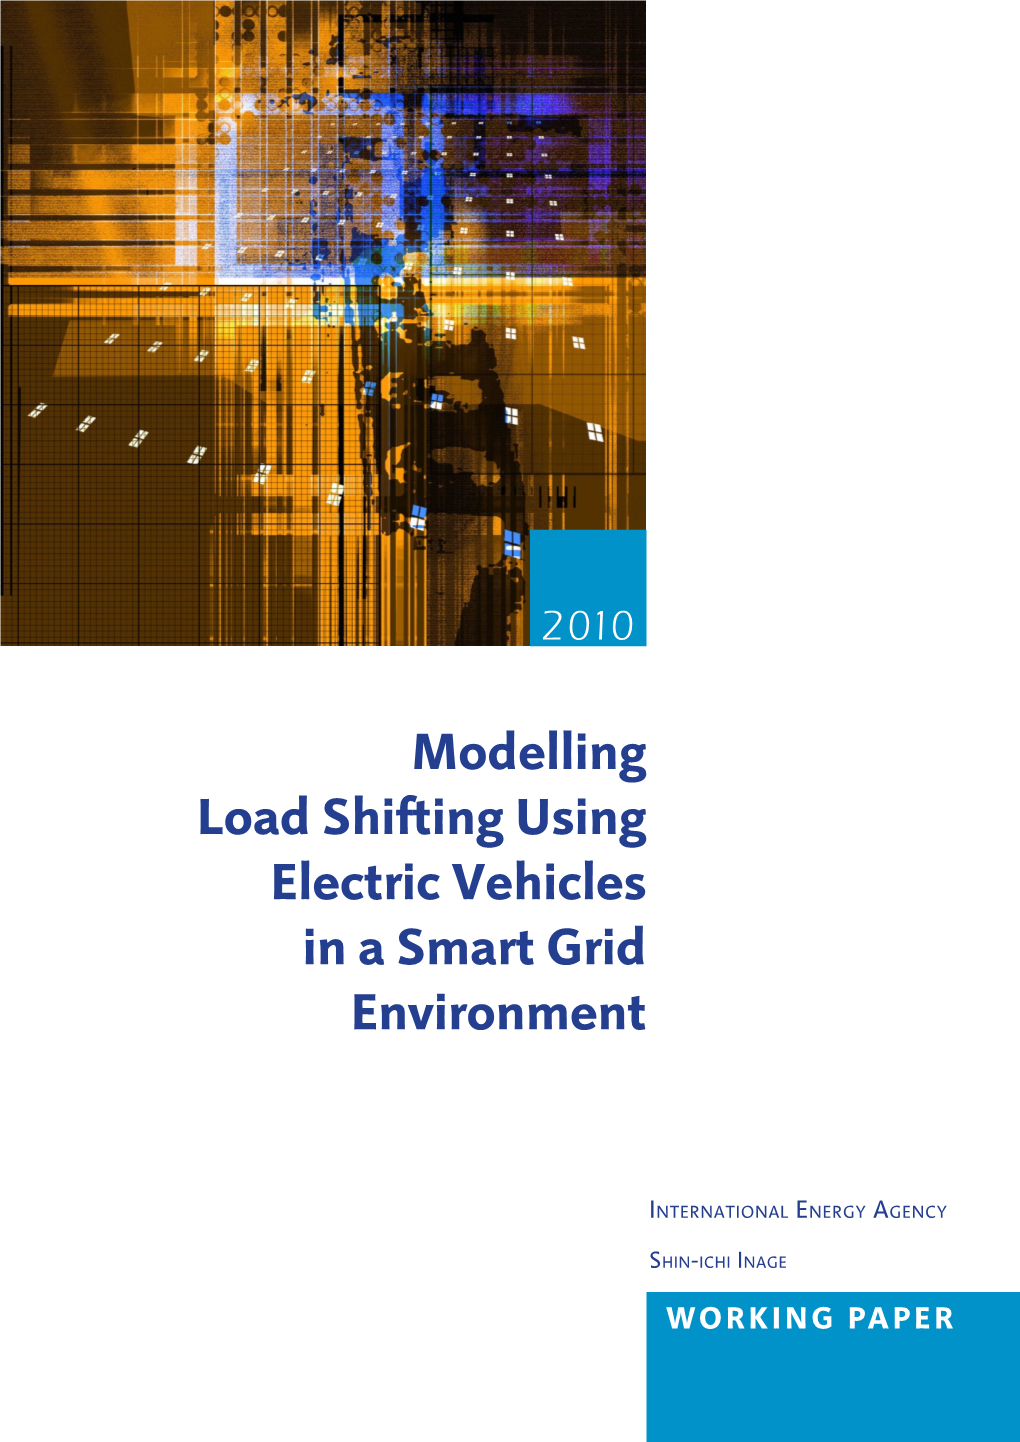 Modelling Load Shifting Using Electric Vehicles in a Smart Grid Environment